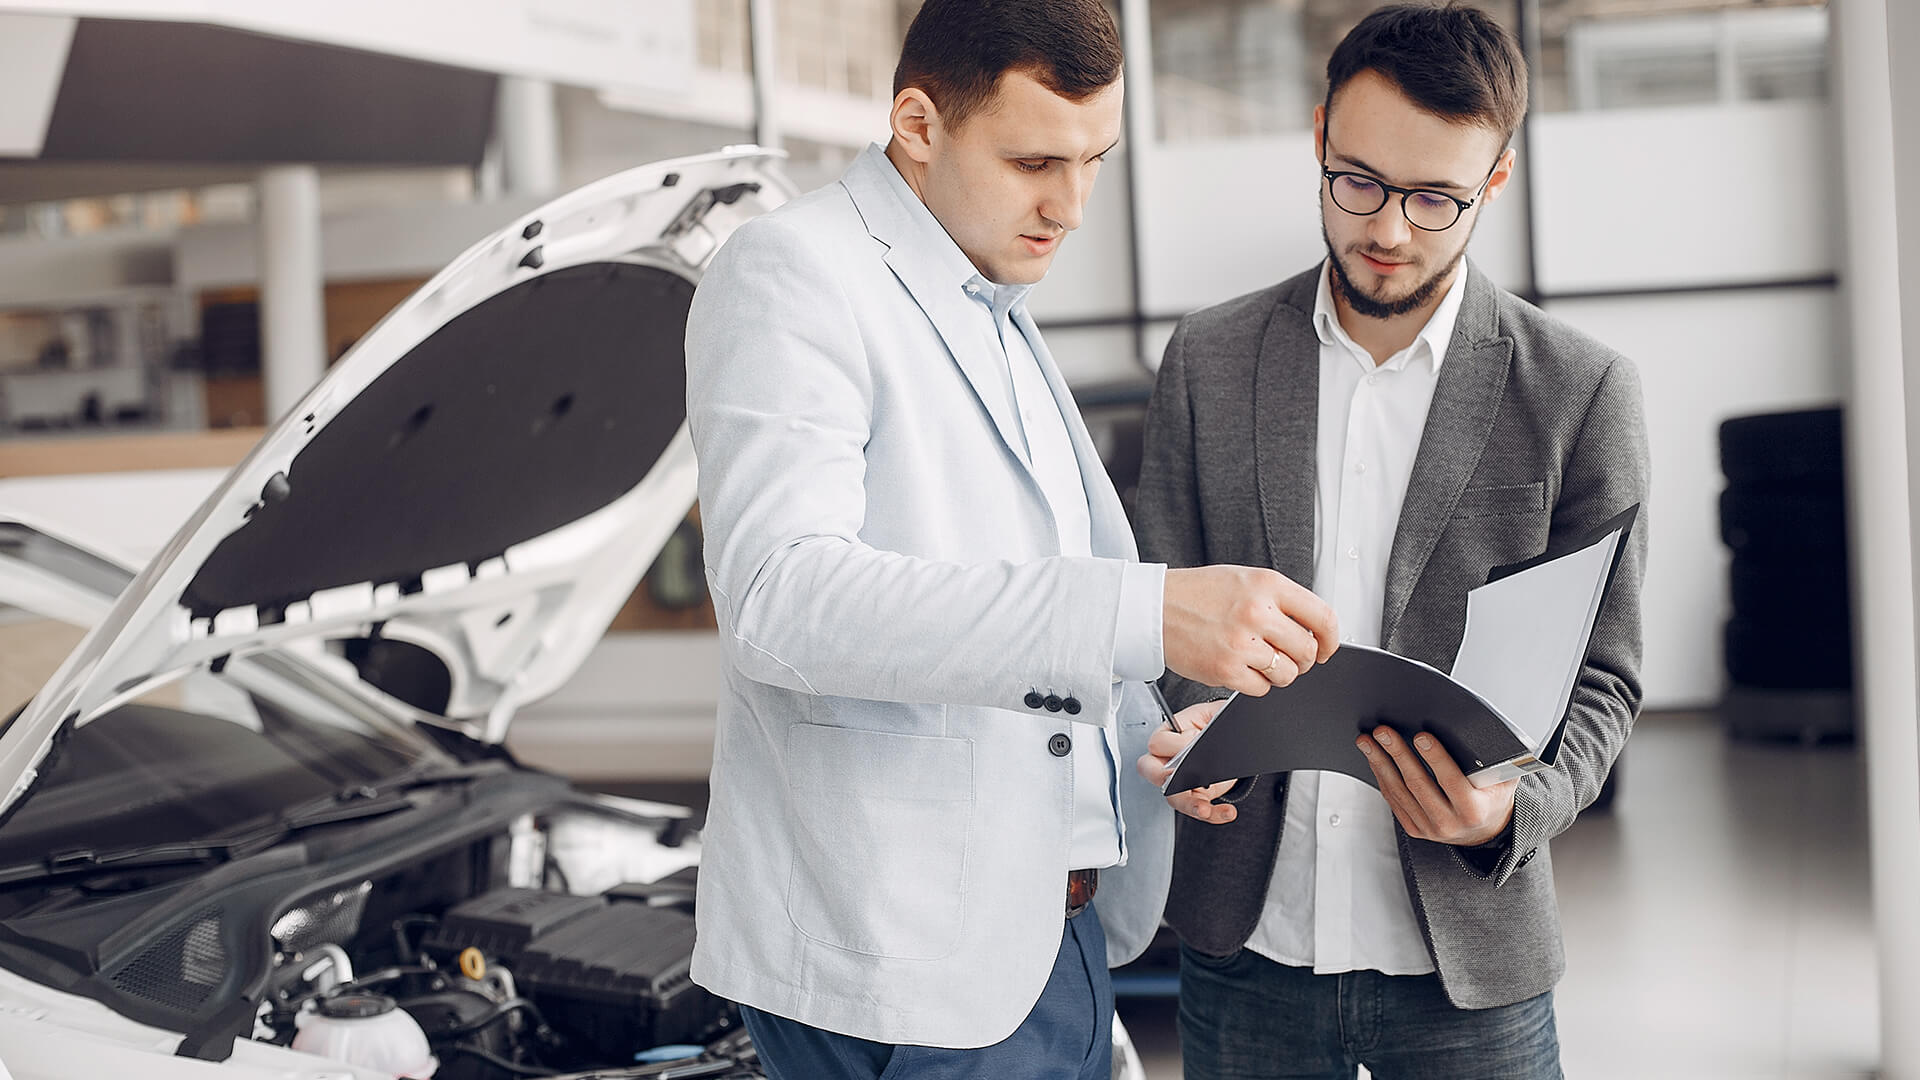 What Is The Dealership Management System?